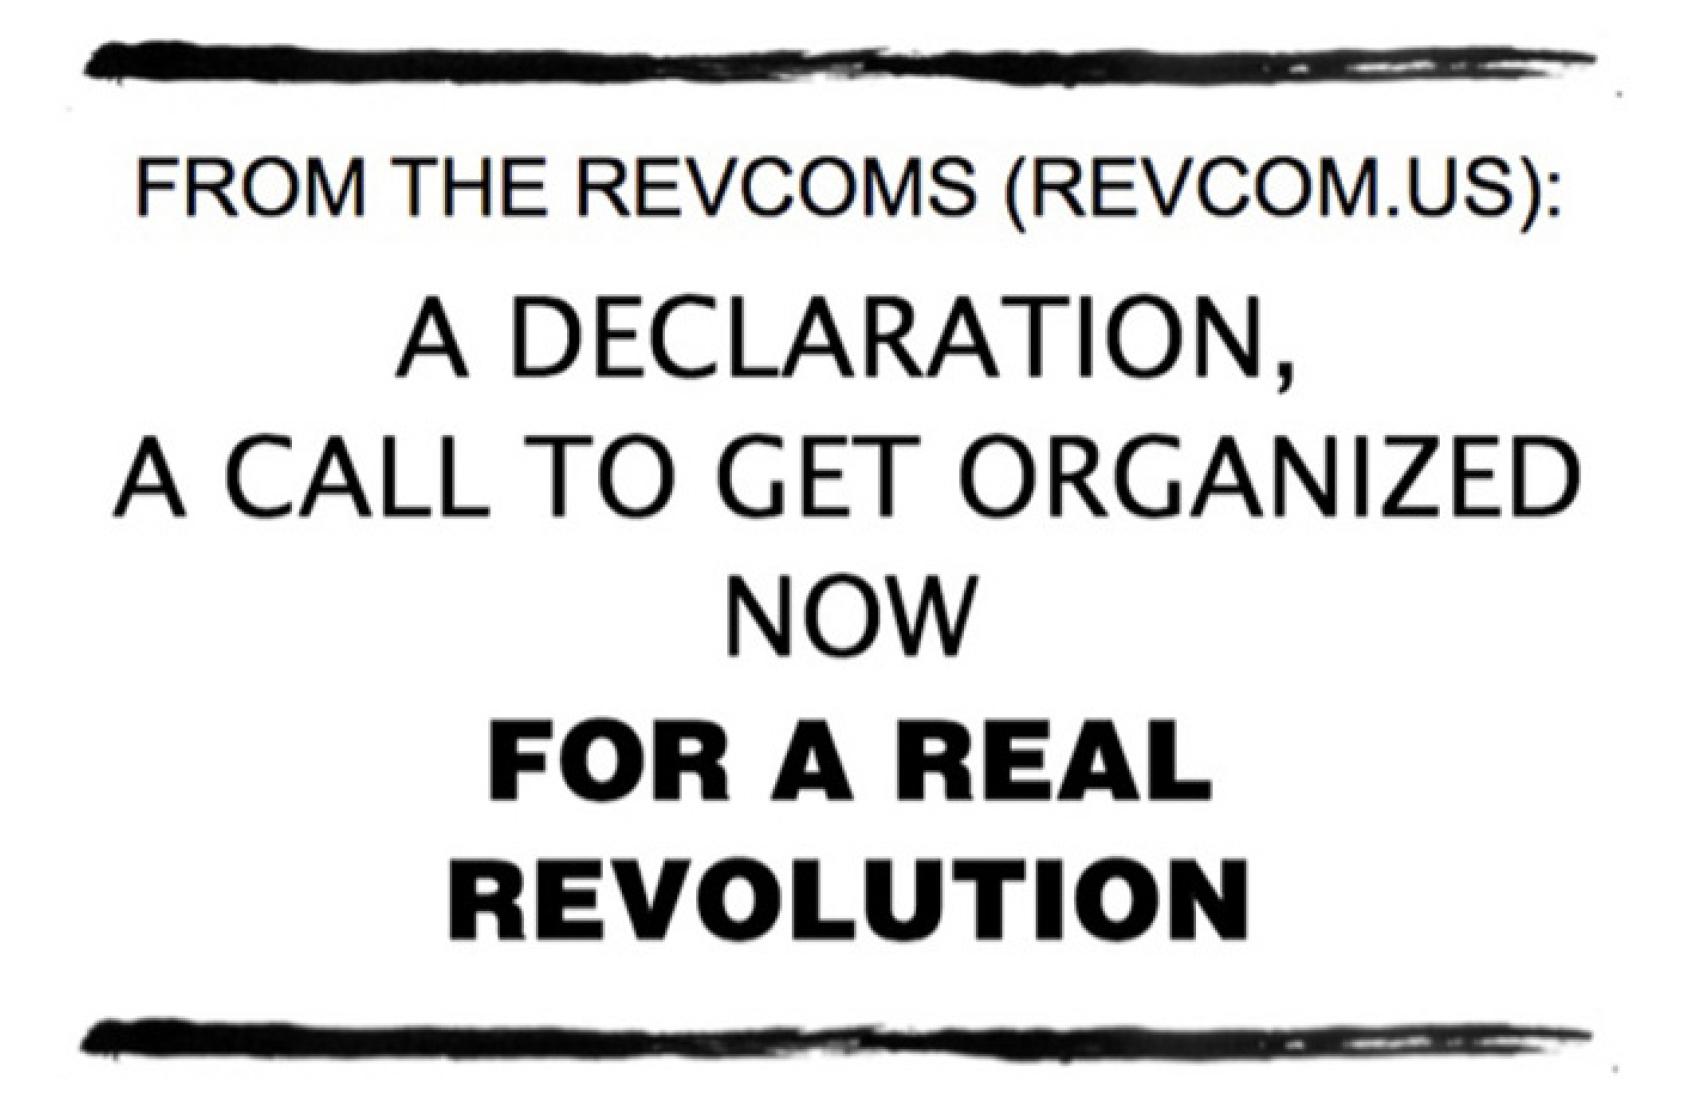 From the Revcoms: A Declaration, A Call to Get Organized Now For A Real Revolution